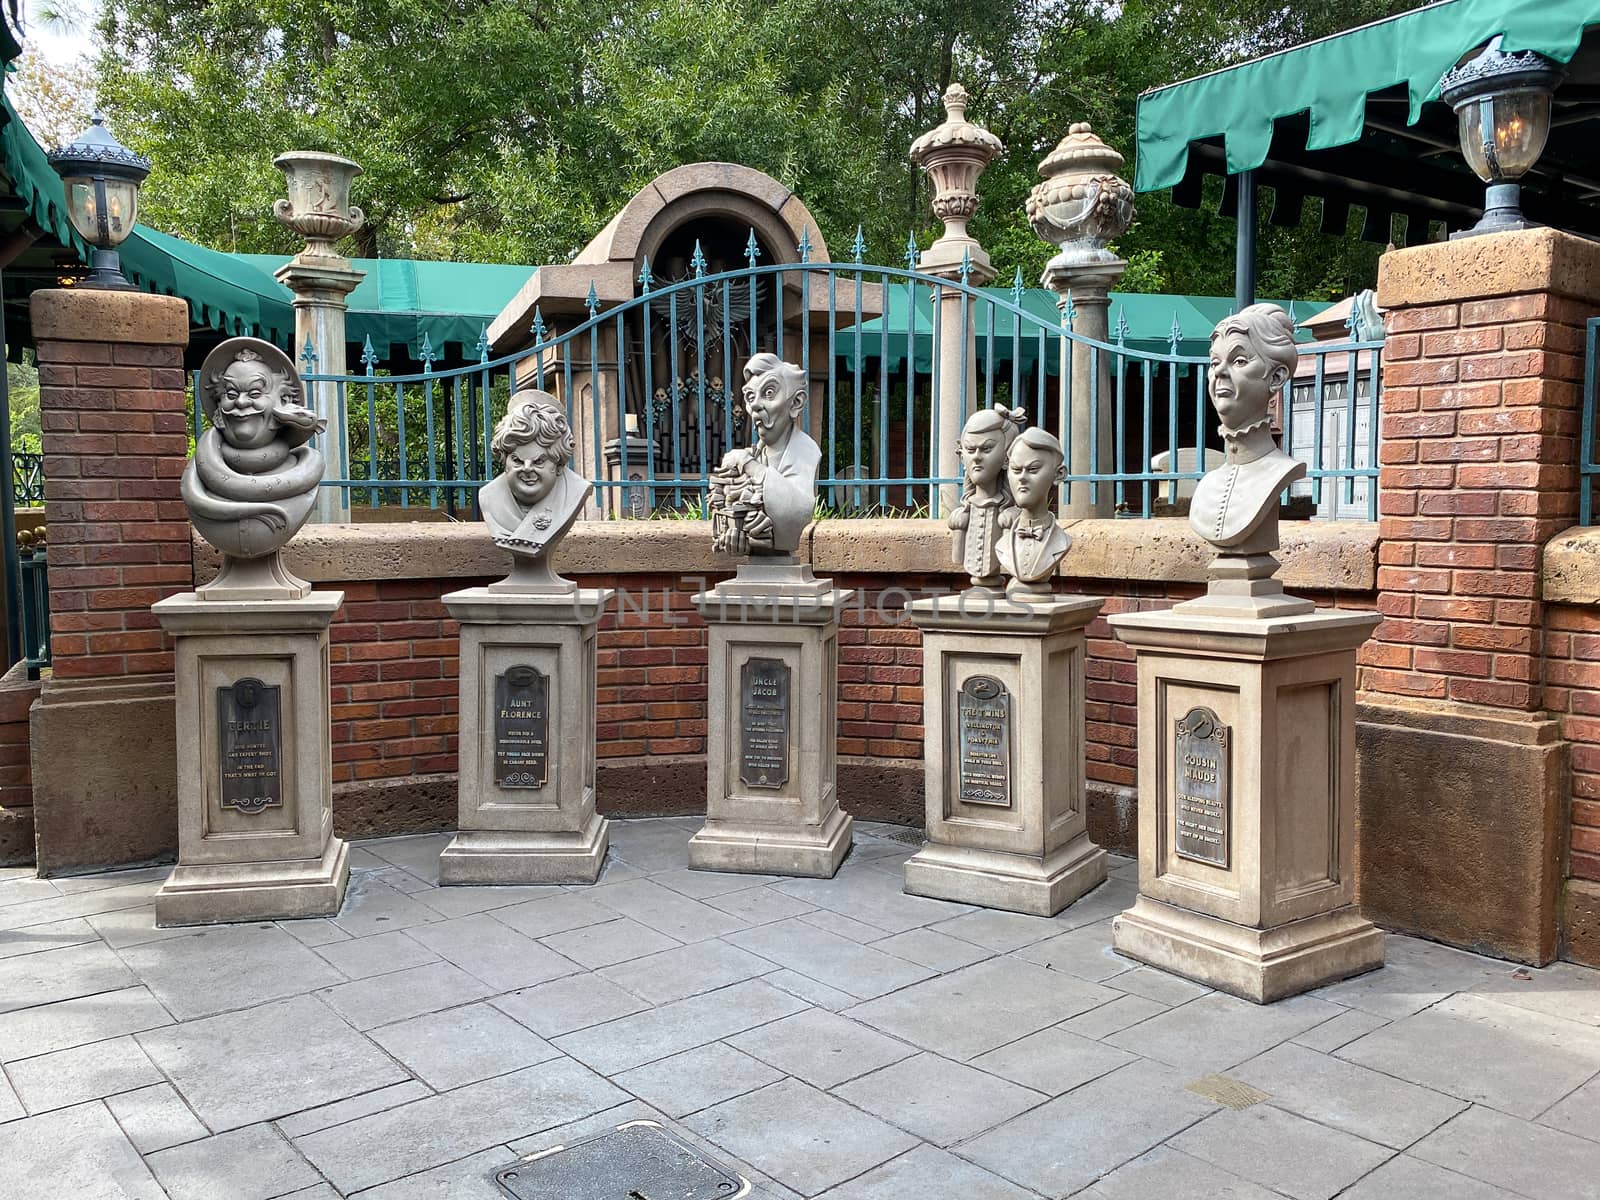 The statues of ghosts outside of the Haunted Mansion ride in the by Jshanebutt